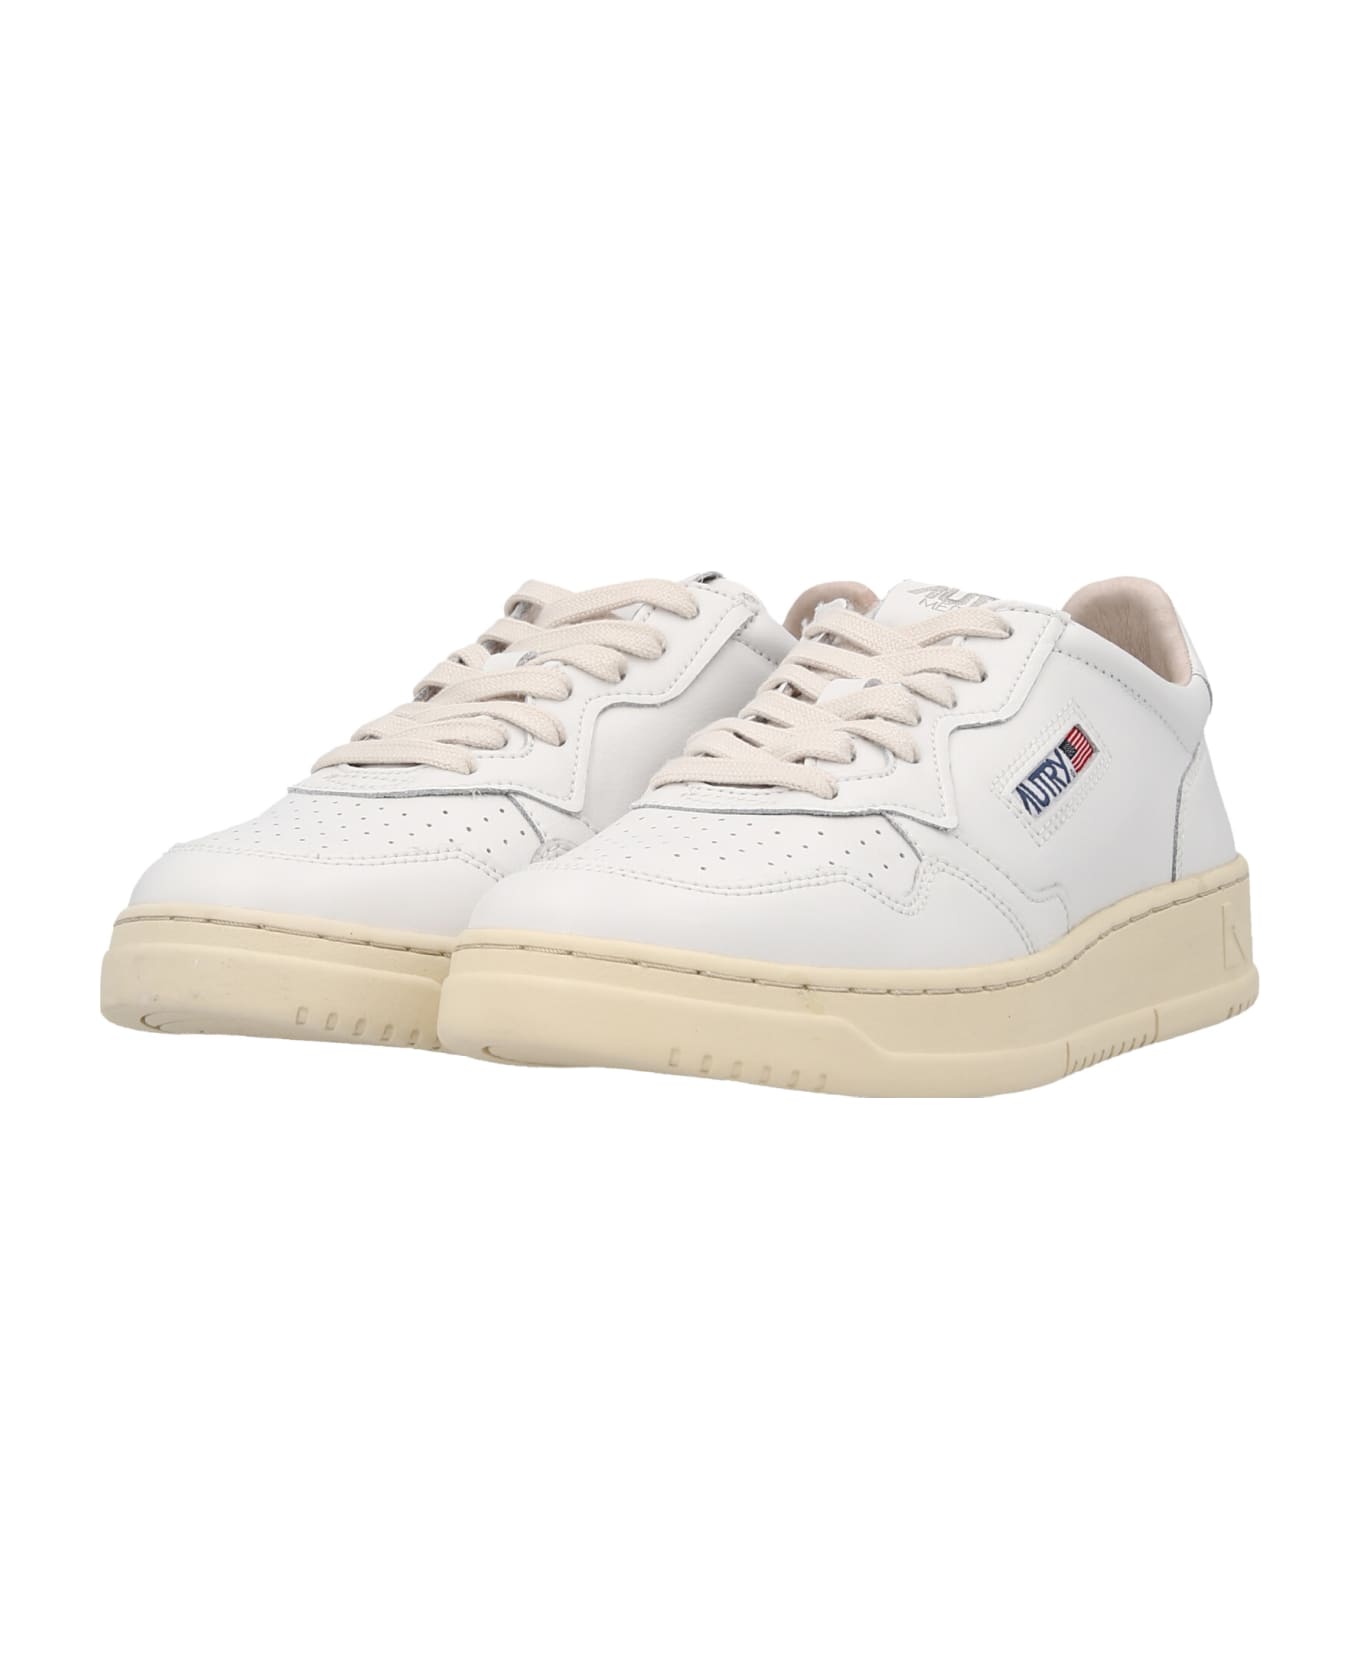 Autry Medalist Sneakers Aulm Ld06 - White